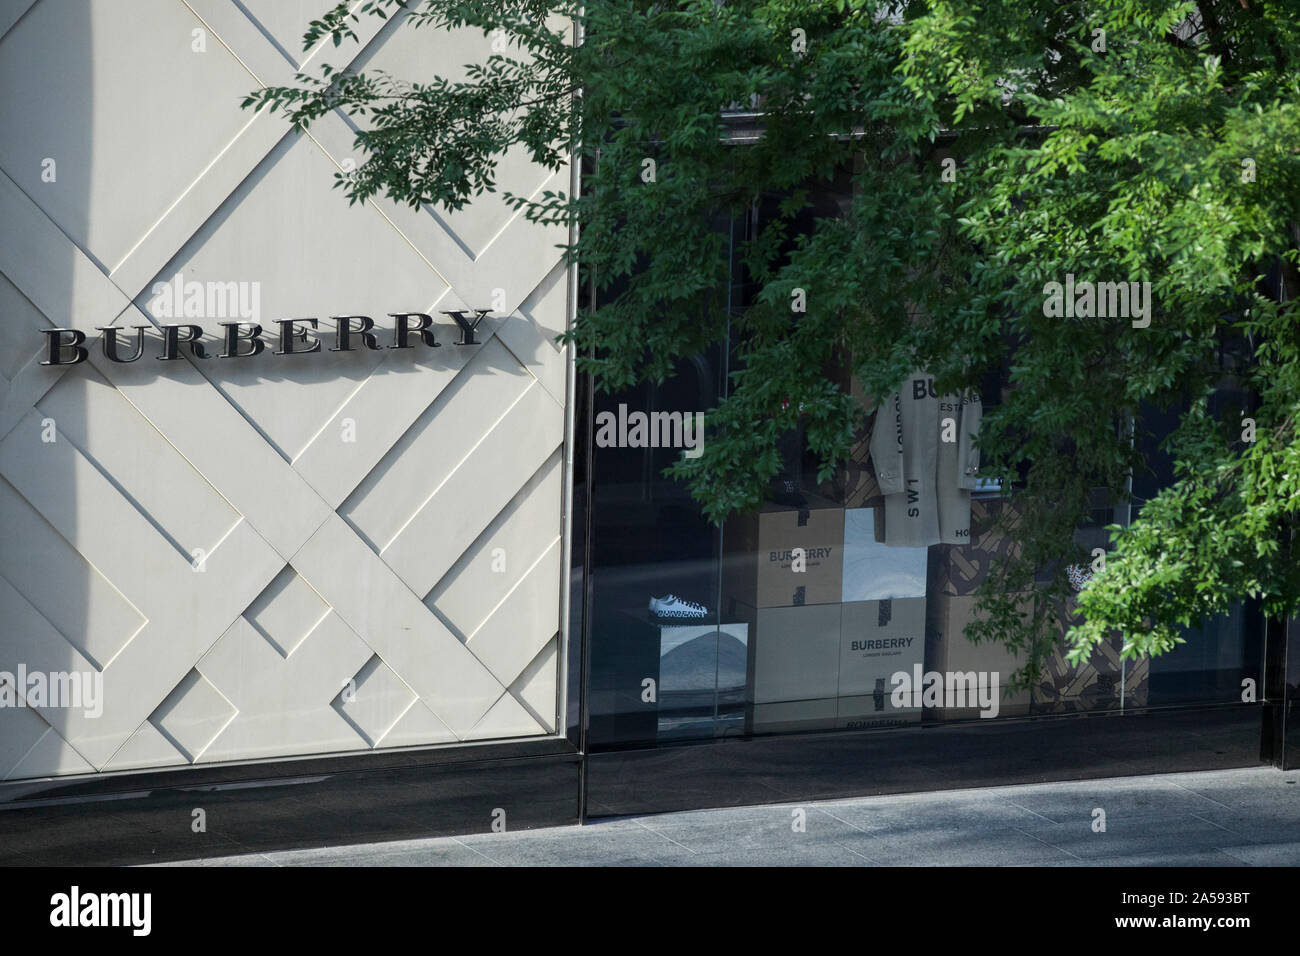 A logo sign outside of a Burberry retail store location in downtown  Washington, D.C. on July 24, 2019 Stock Photo - Alamy